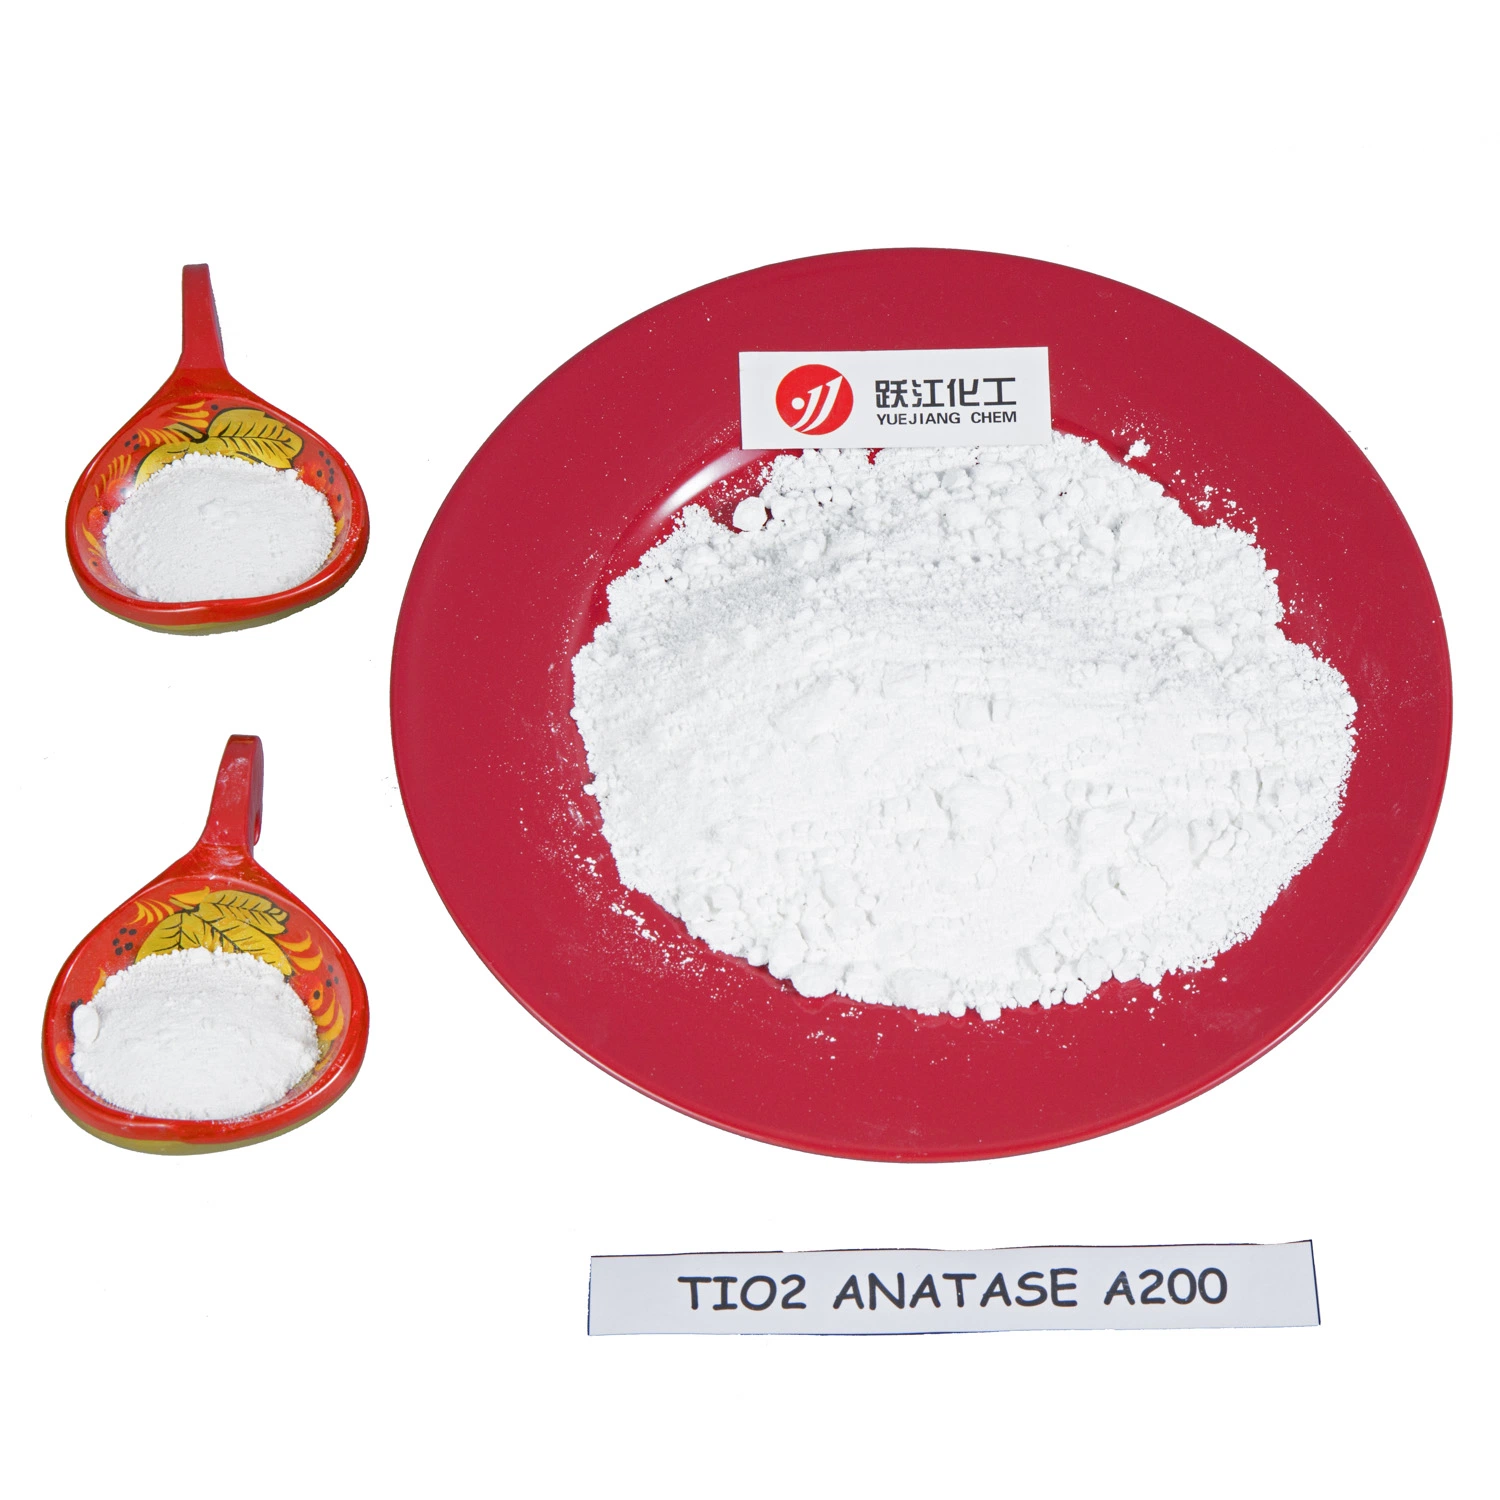 Titanium Dioxide Anatase A200 for Medical Package Use